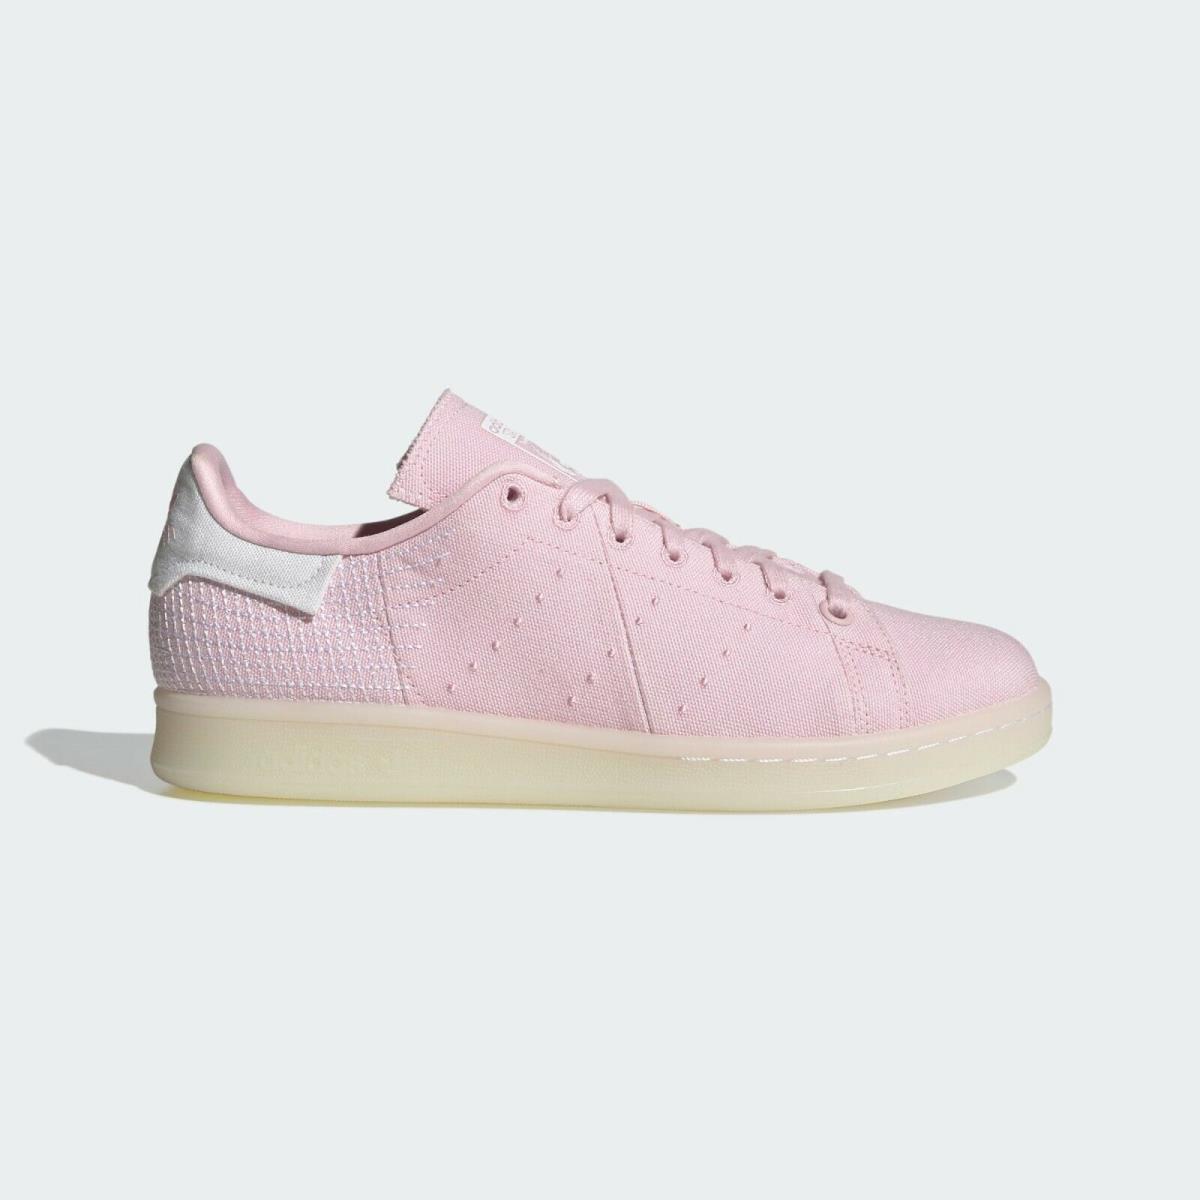 Adidas shoes STAN SMITH PRIMEBLUE - Clear Pink / Cloud White / Core Black 0